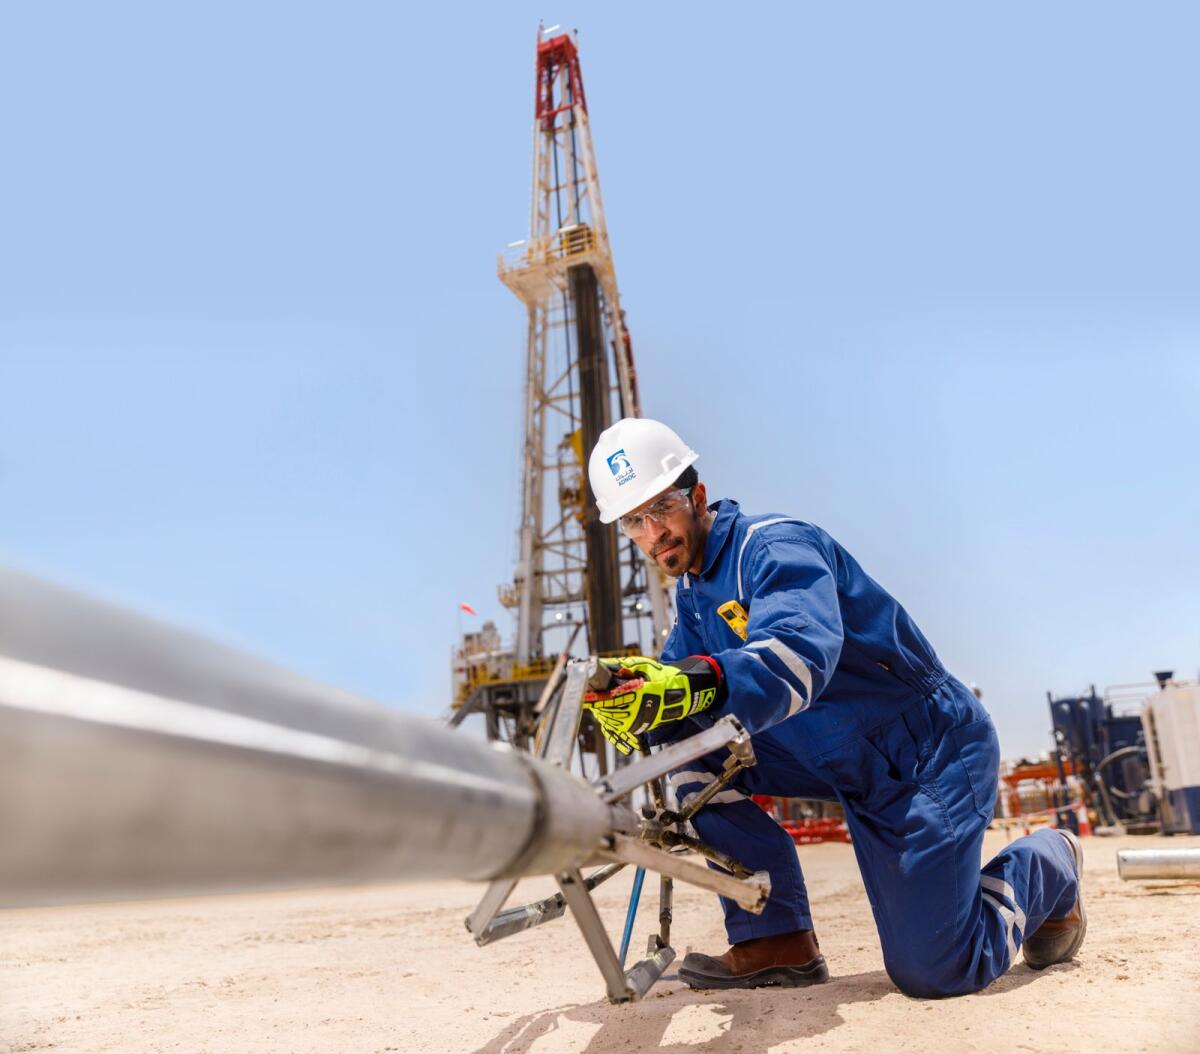 The company’s accelerated rig acquisition programme added 16 new drilling units in 2022, establishing one of the world’s largest drilling and well completion fleets consisting of 115 rigs. — Supplied photo